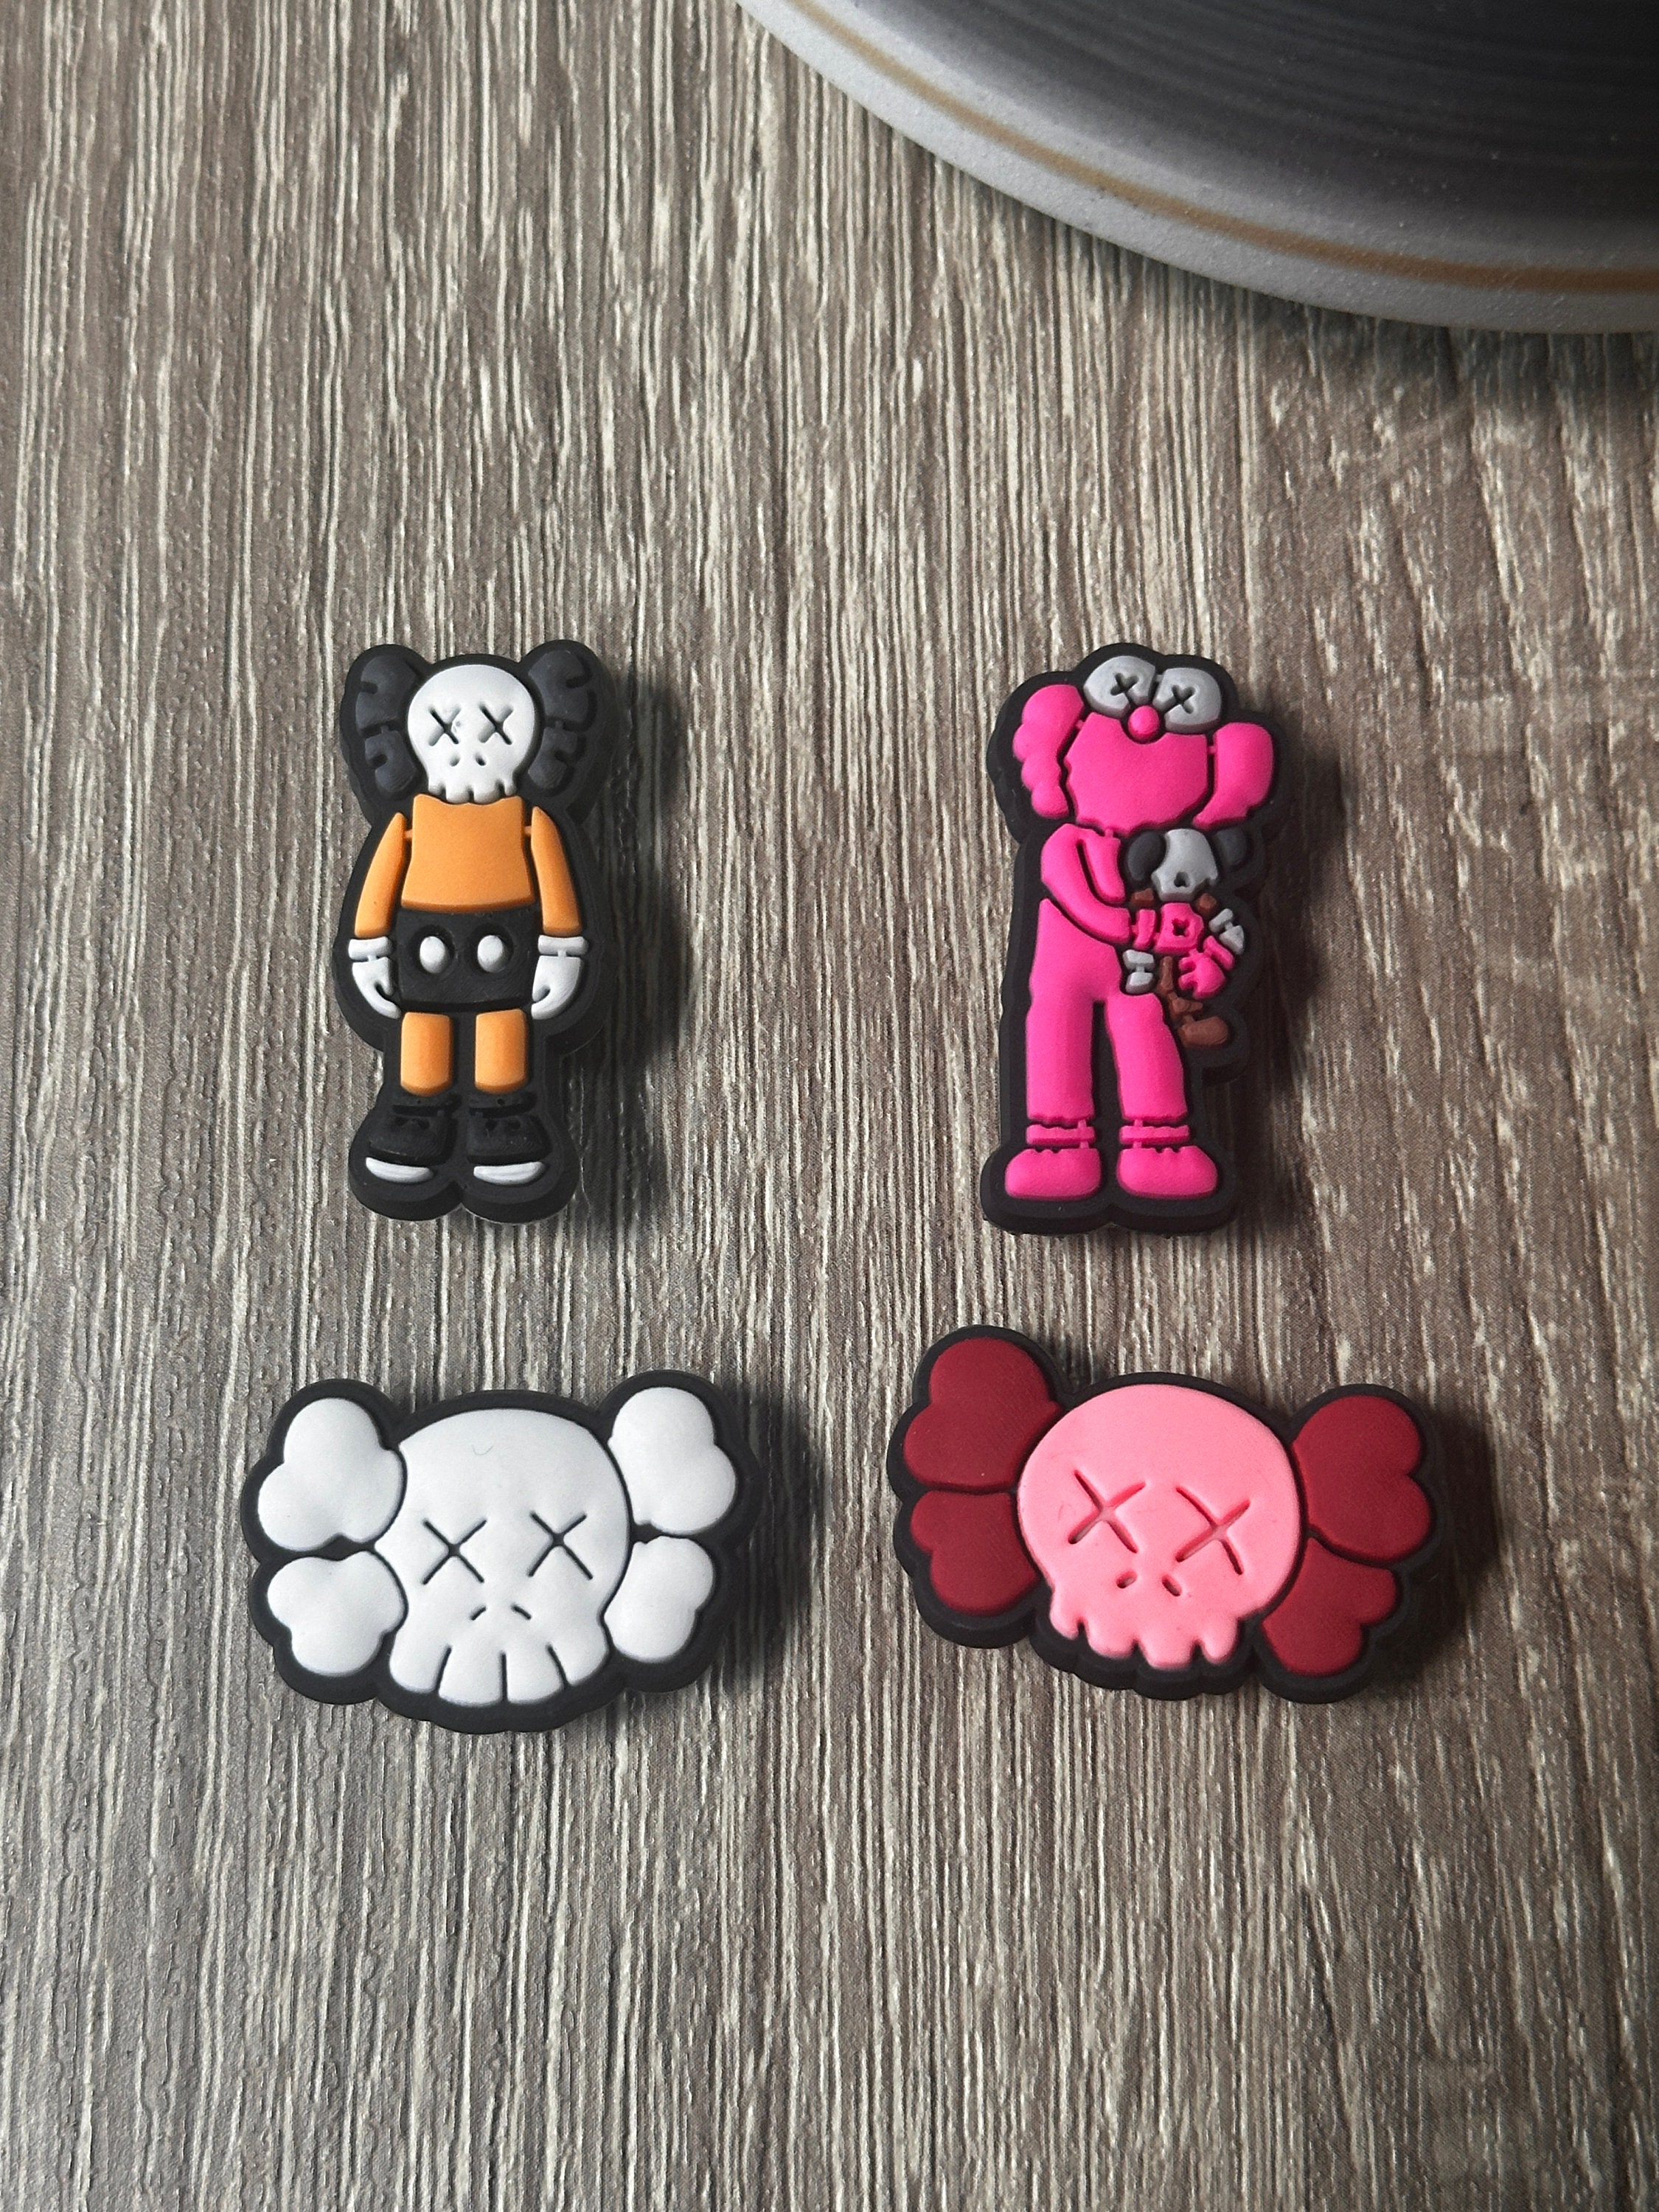 Diy Kaws charms?!?! 👀 These little charms can be expensive so i